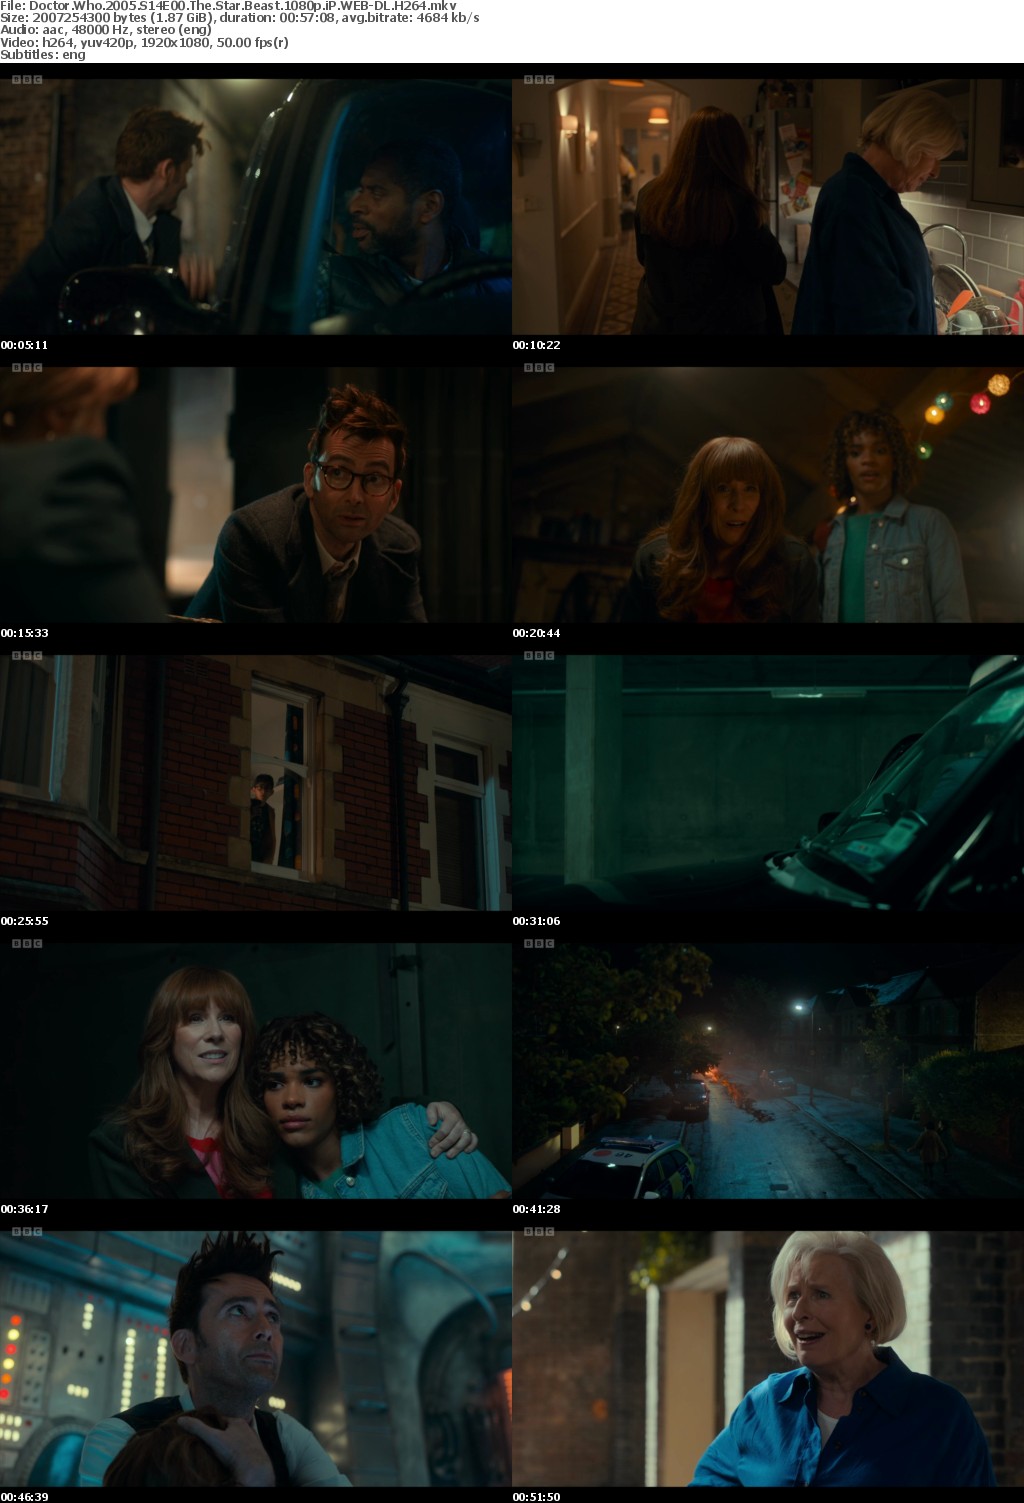 Doctor Who 2005 S14E00 The Star Beast 1080p iP WEB-DL H264